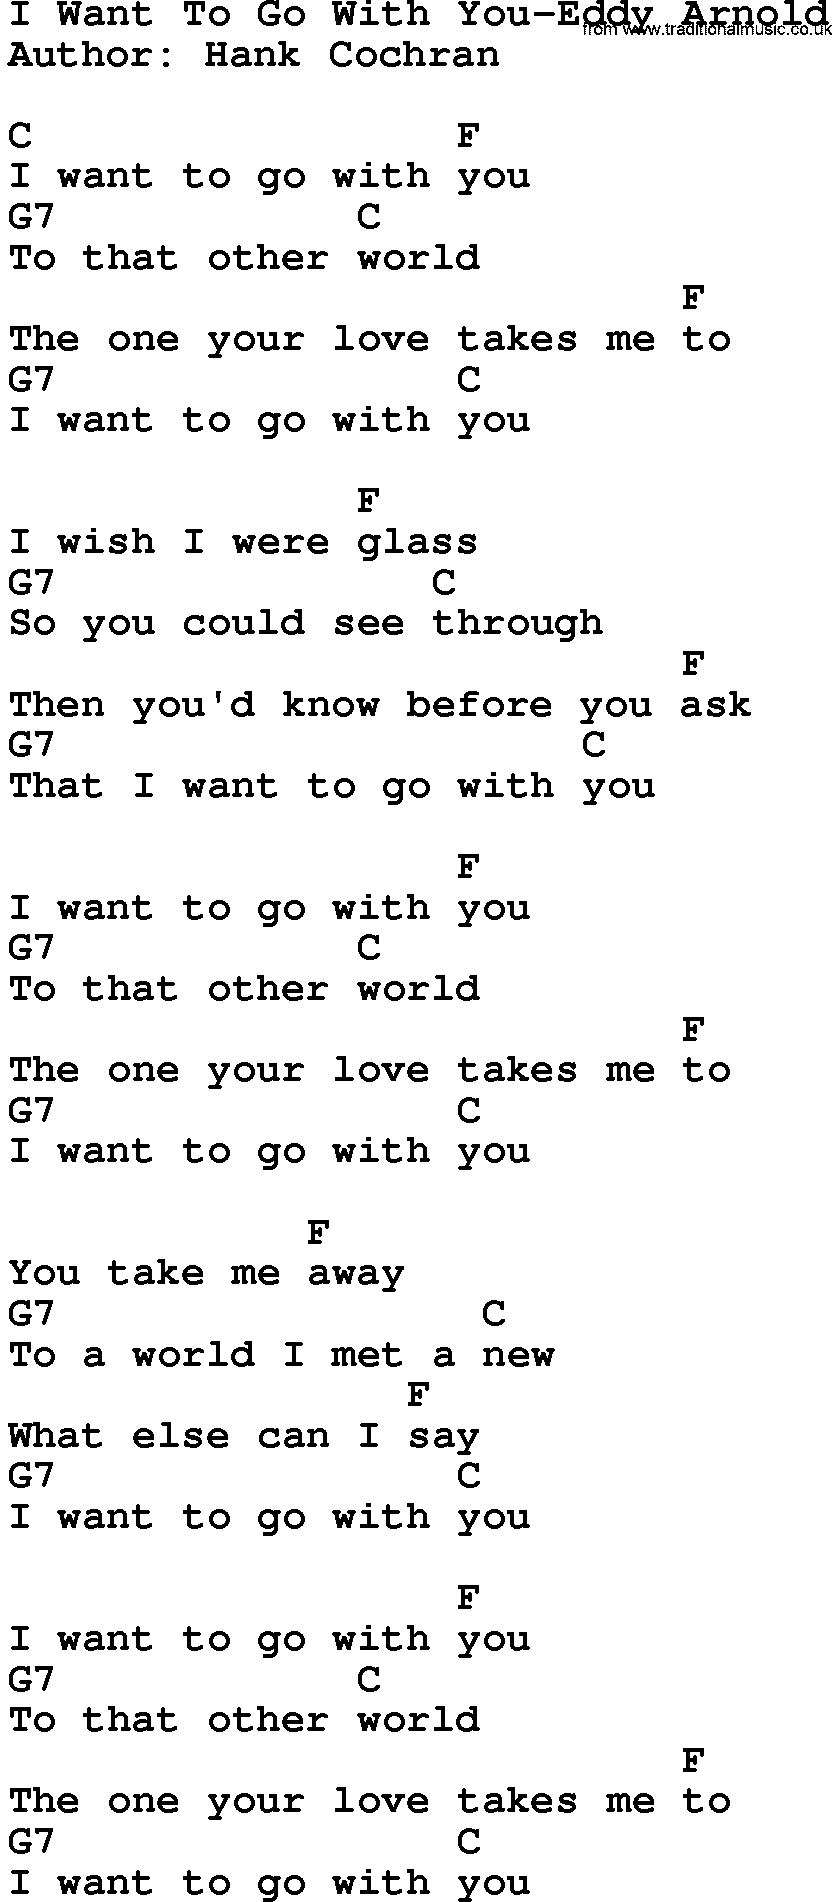 Country music song: I Want To Go With You-Eddy Arnold lyrics and chords